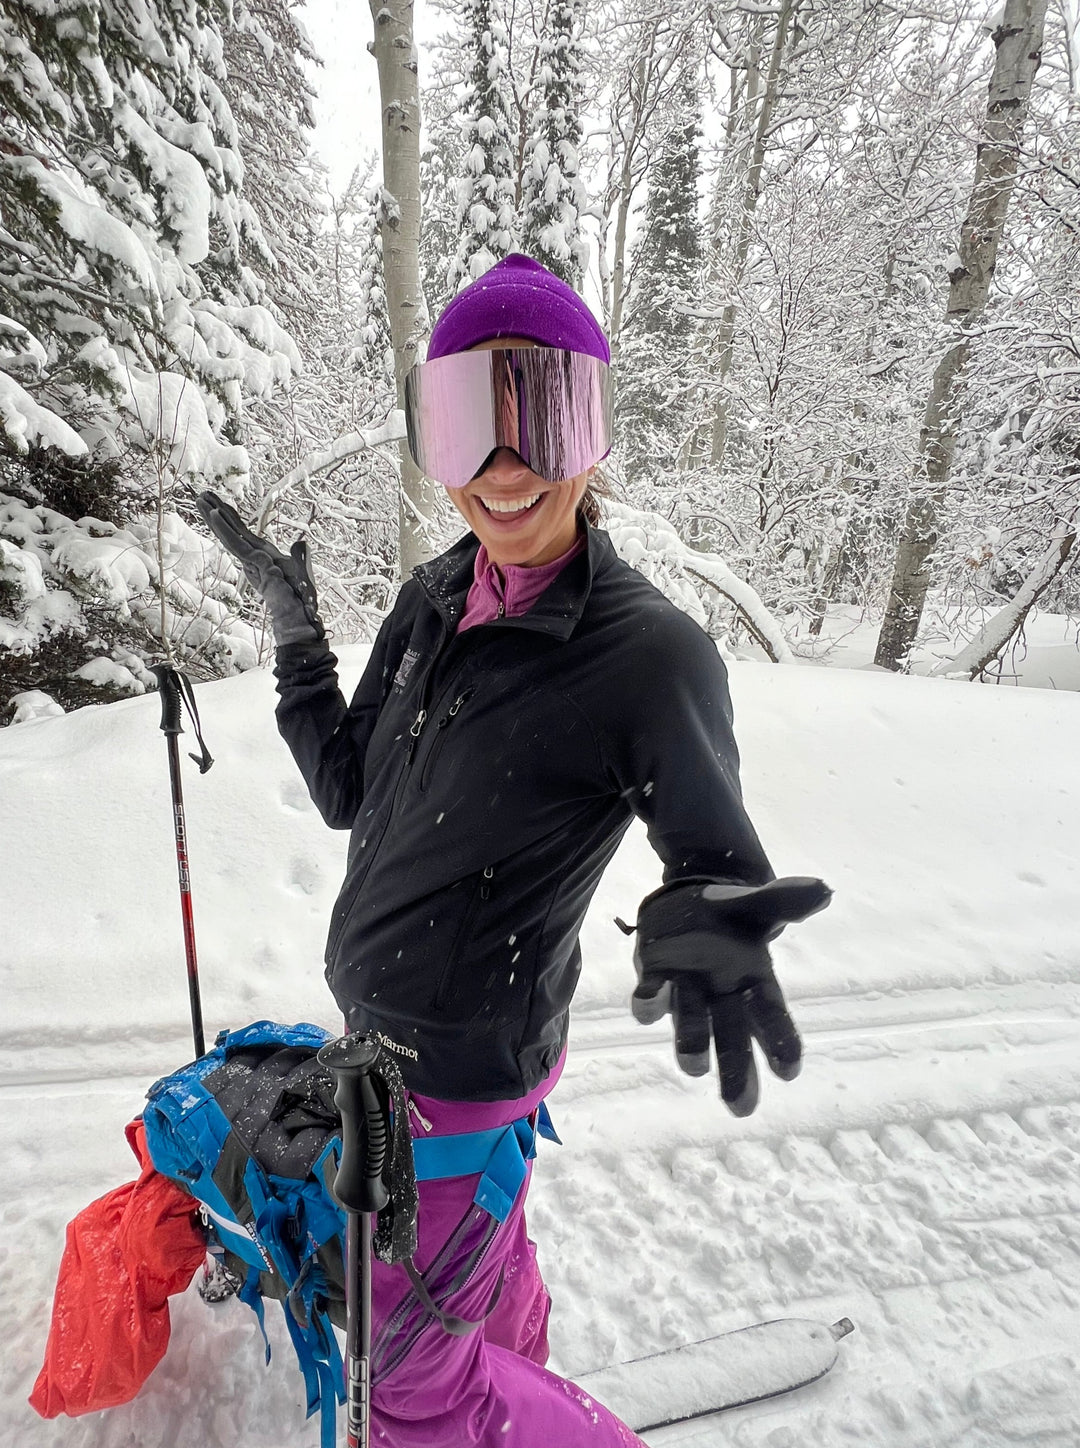 Ali shows us her pink Eastern Outer ski goggles while in the backcountry